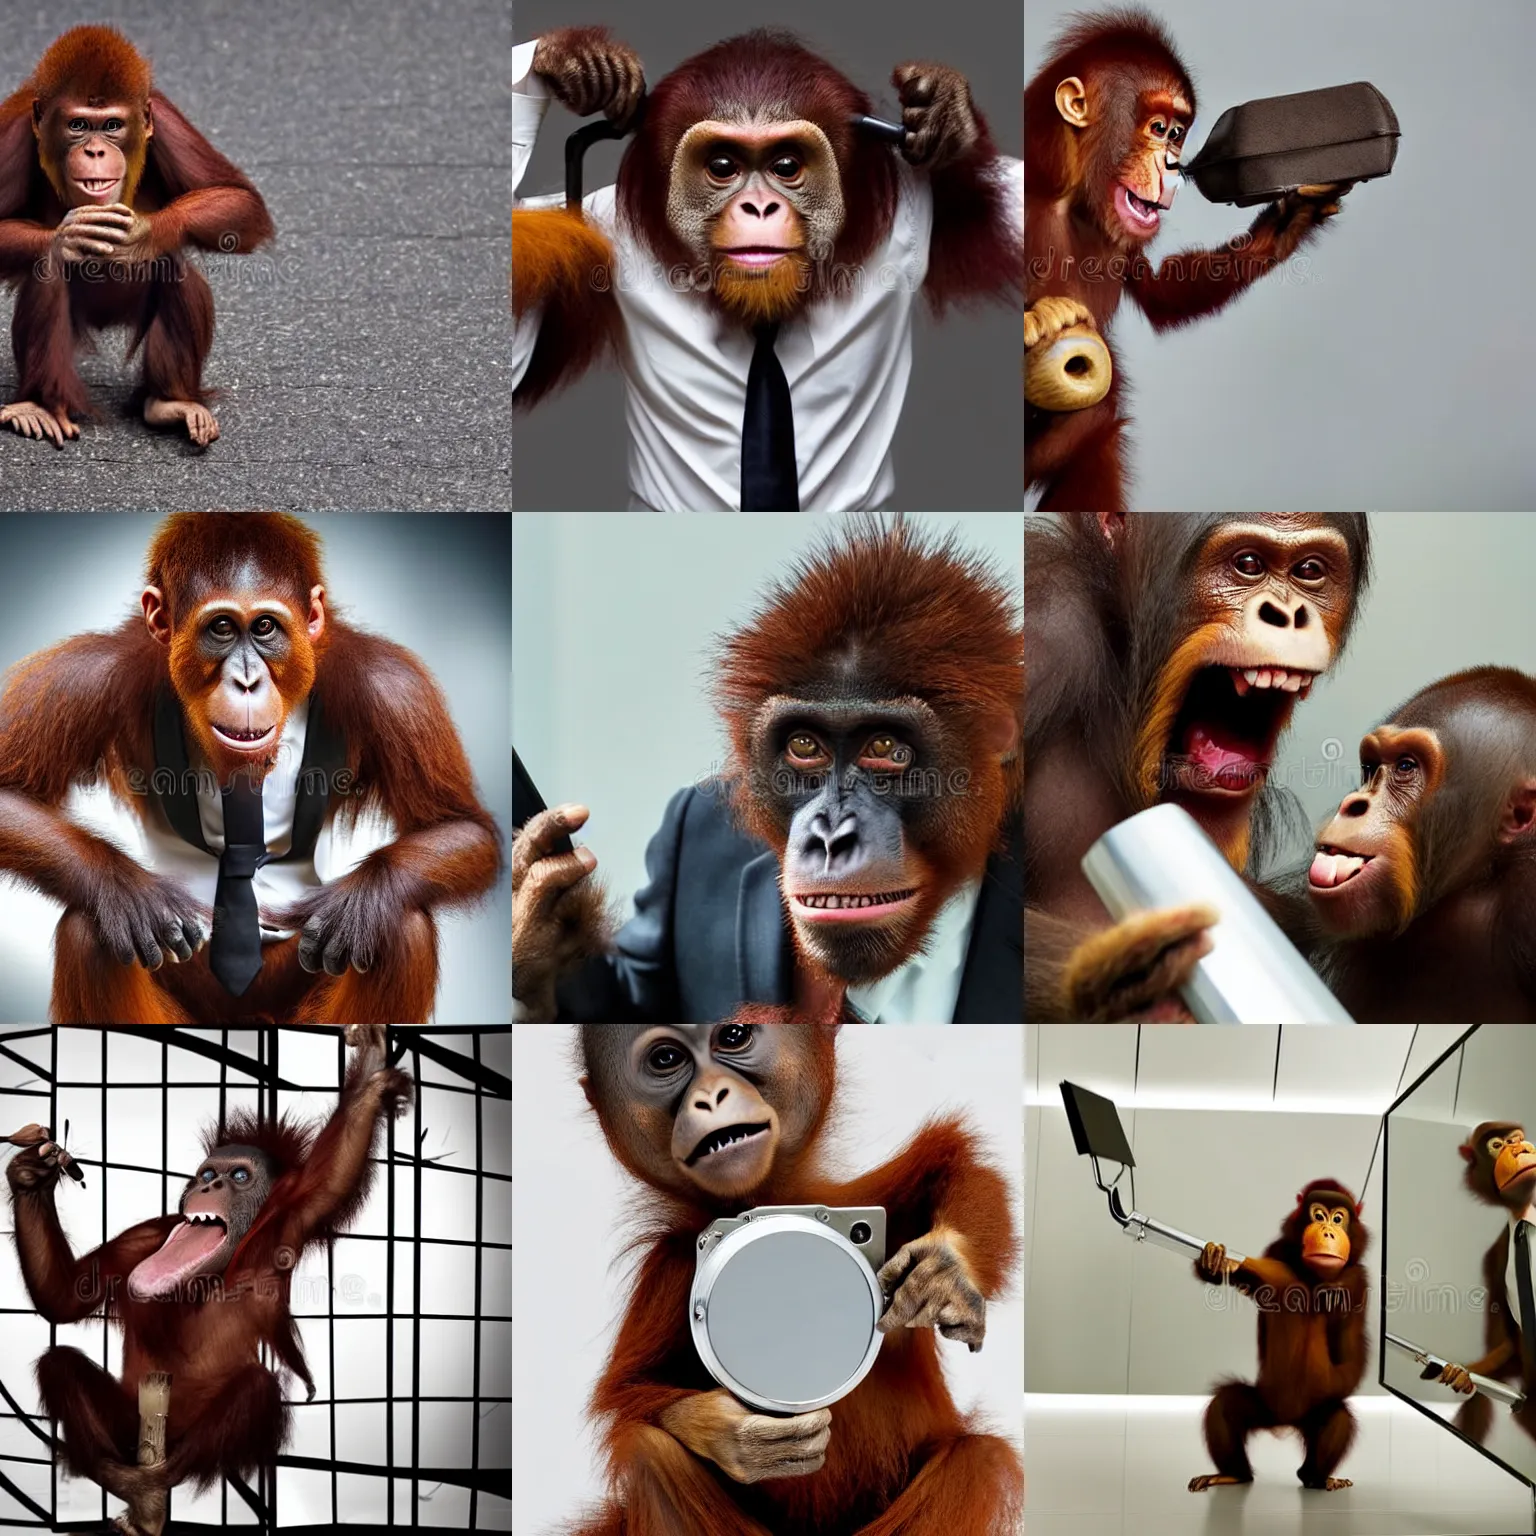 Prompt: angry screaming business monkey in a business suit orangutan, wearing a suit, holding a briefcase, standing in front of a mirror, yelling, mirror, angry at mirror, photograph 5 5 mm zeiss f / 4 award winning photograph stock photo, film still by denis villeneuve